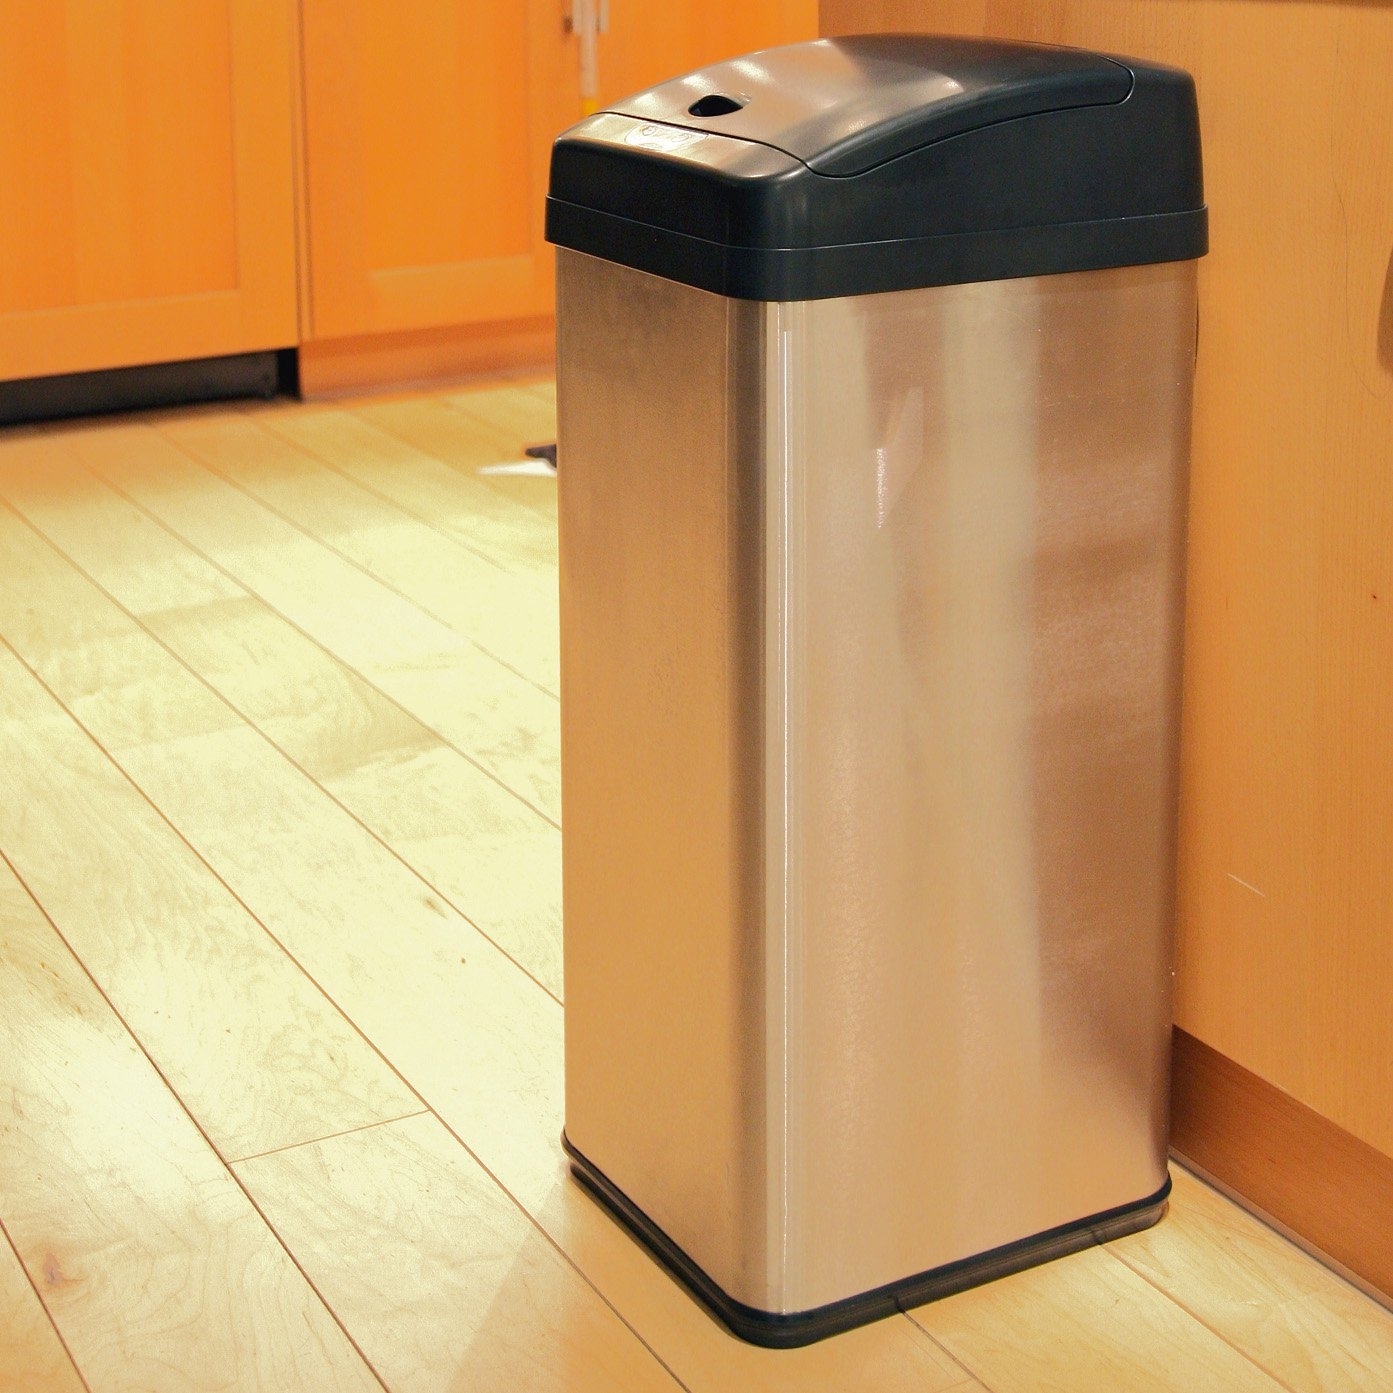 Rubbermaid Stainless Steel Trash Cans